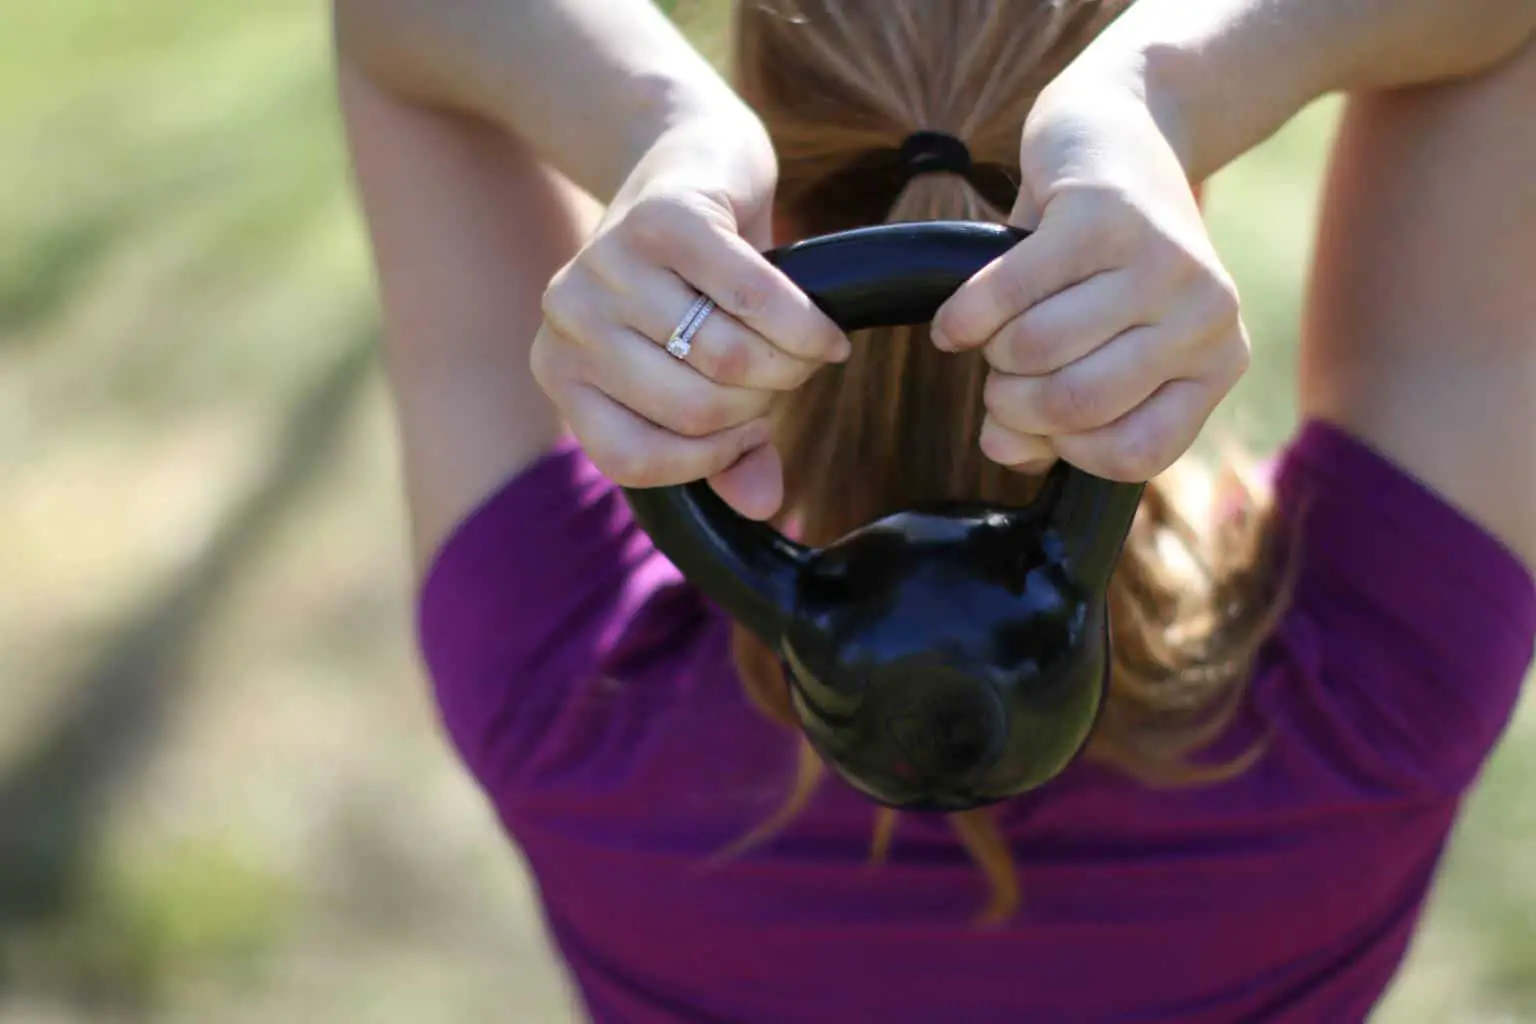 Woman lifting a kettlebell with both hands over her upper back